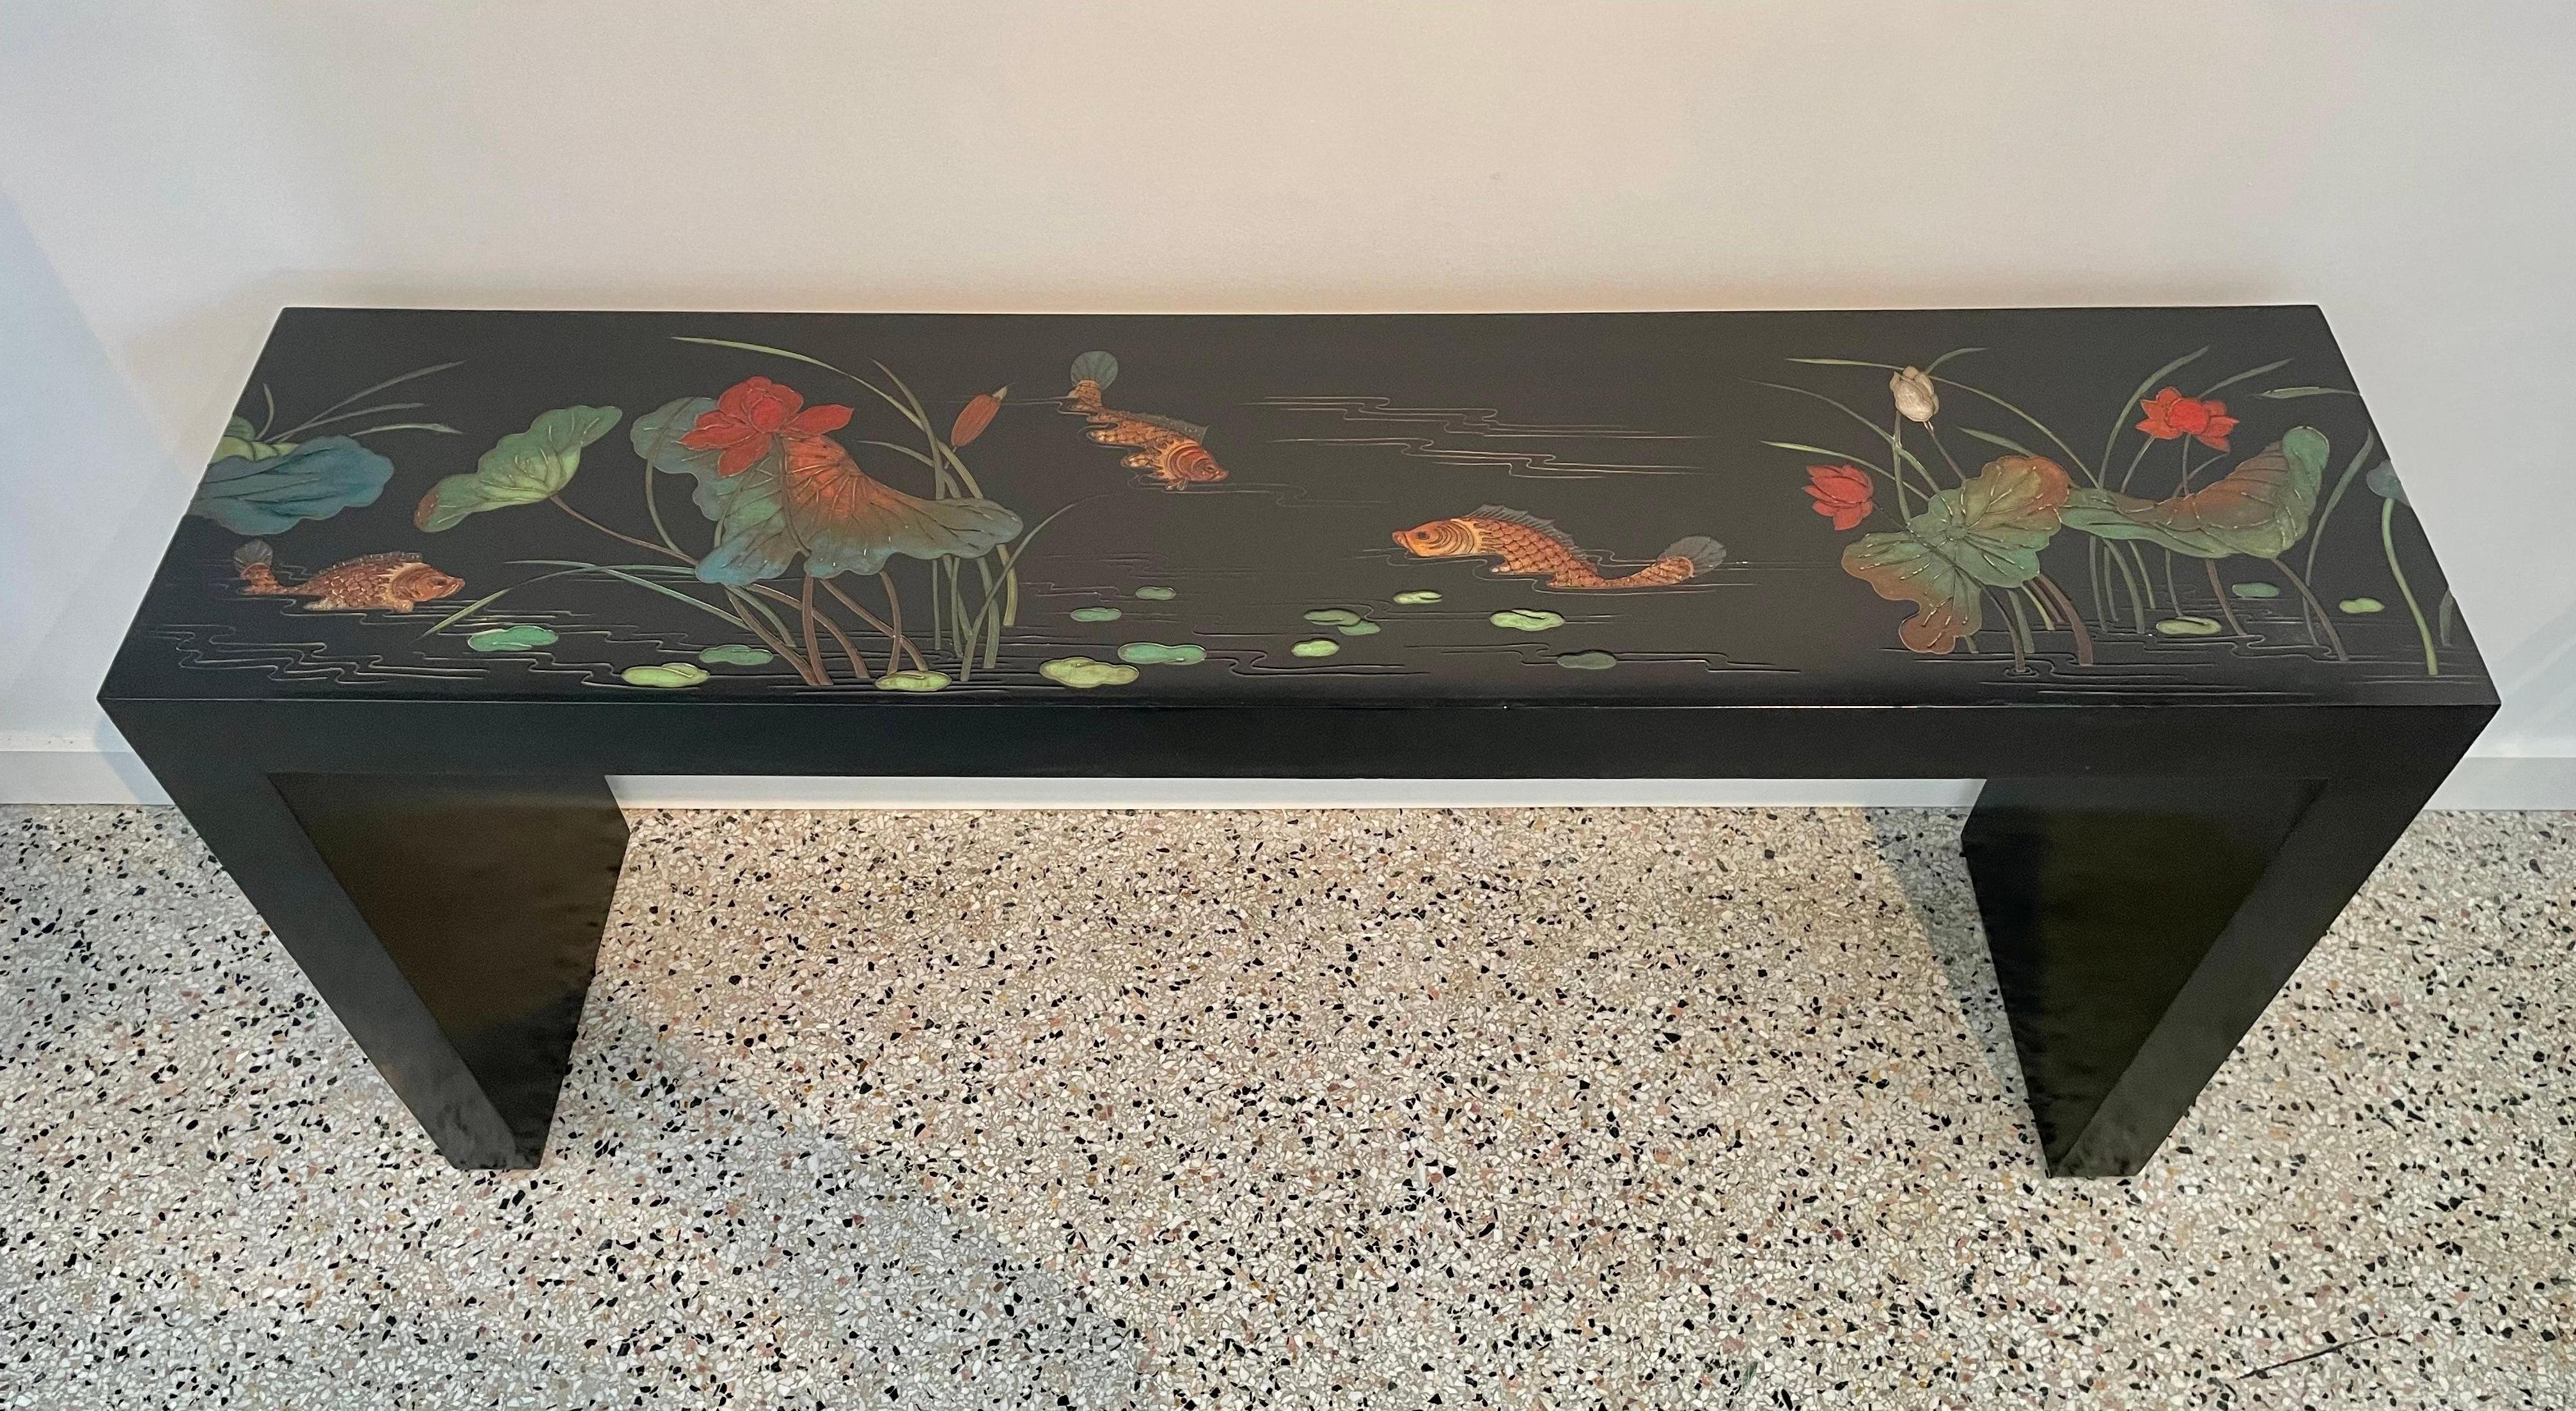 This stylish and chic console table takes its form and details from the Art Deco period in Hong Kong. The piece is detailed in a coromandel panel style with a black lacquered frame with stylized florals, and koi fish. 

